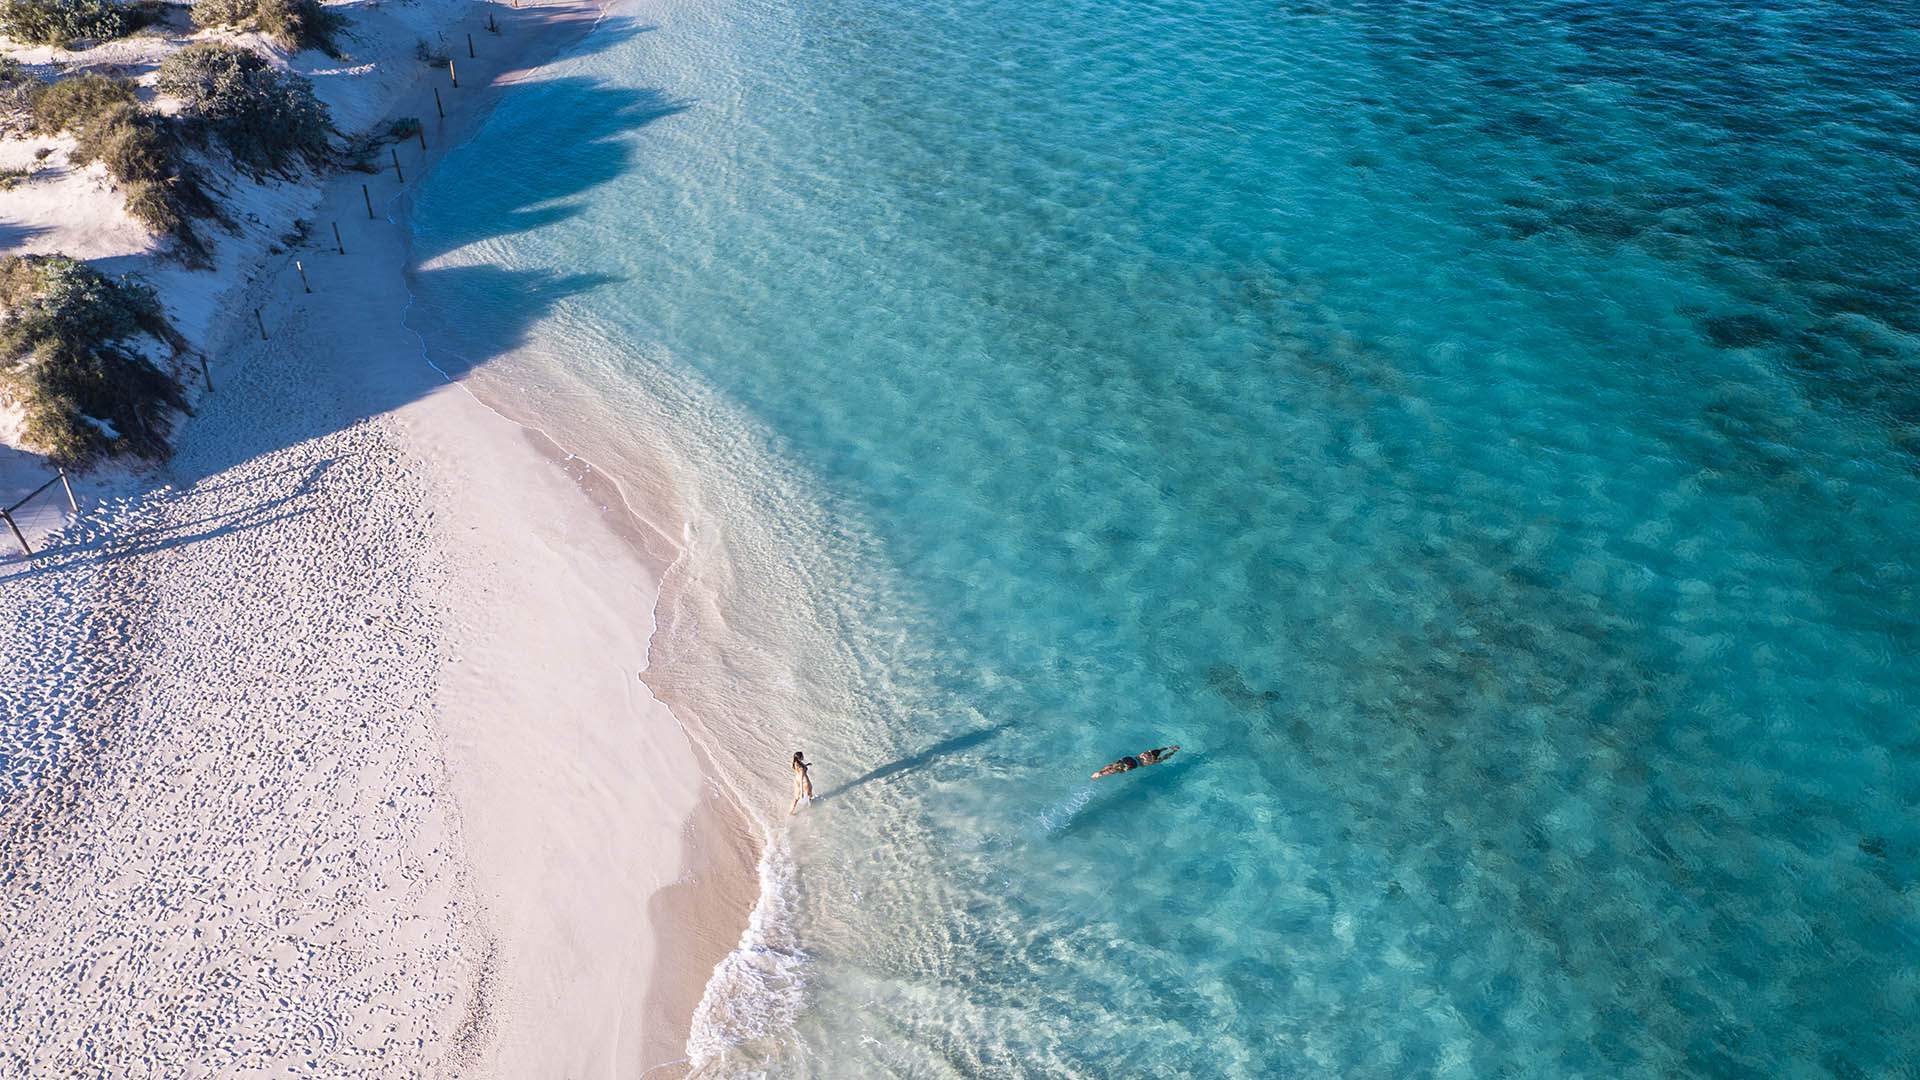 Western Australia's Turquoise Bay Has Been Named the Best Beach in the South Pacific for 2022